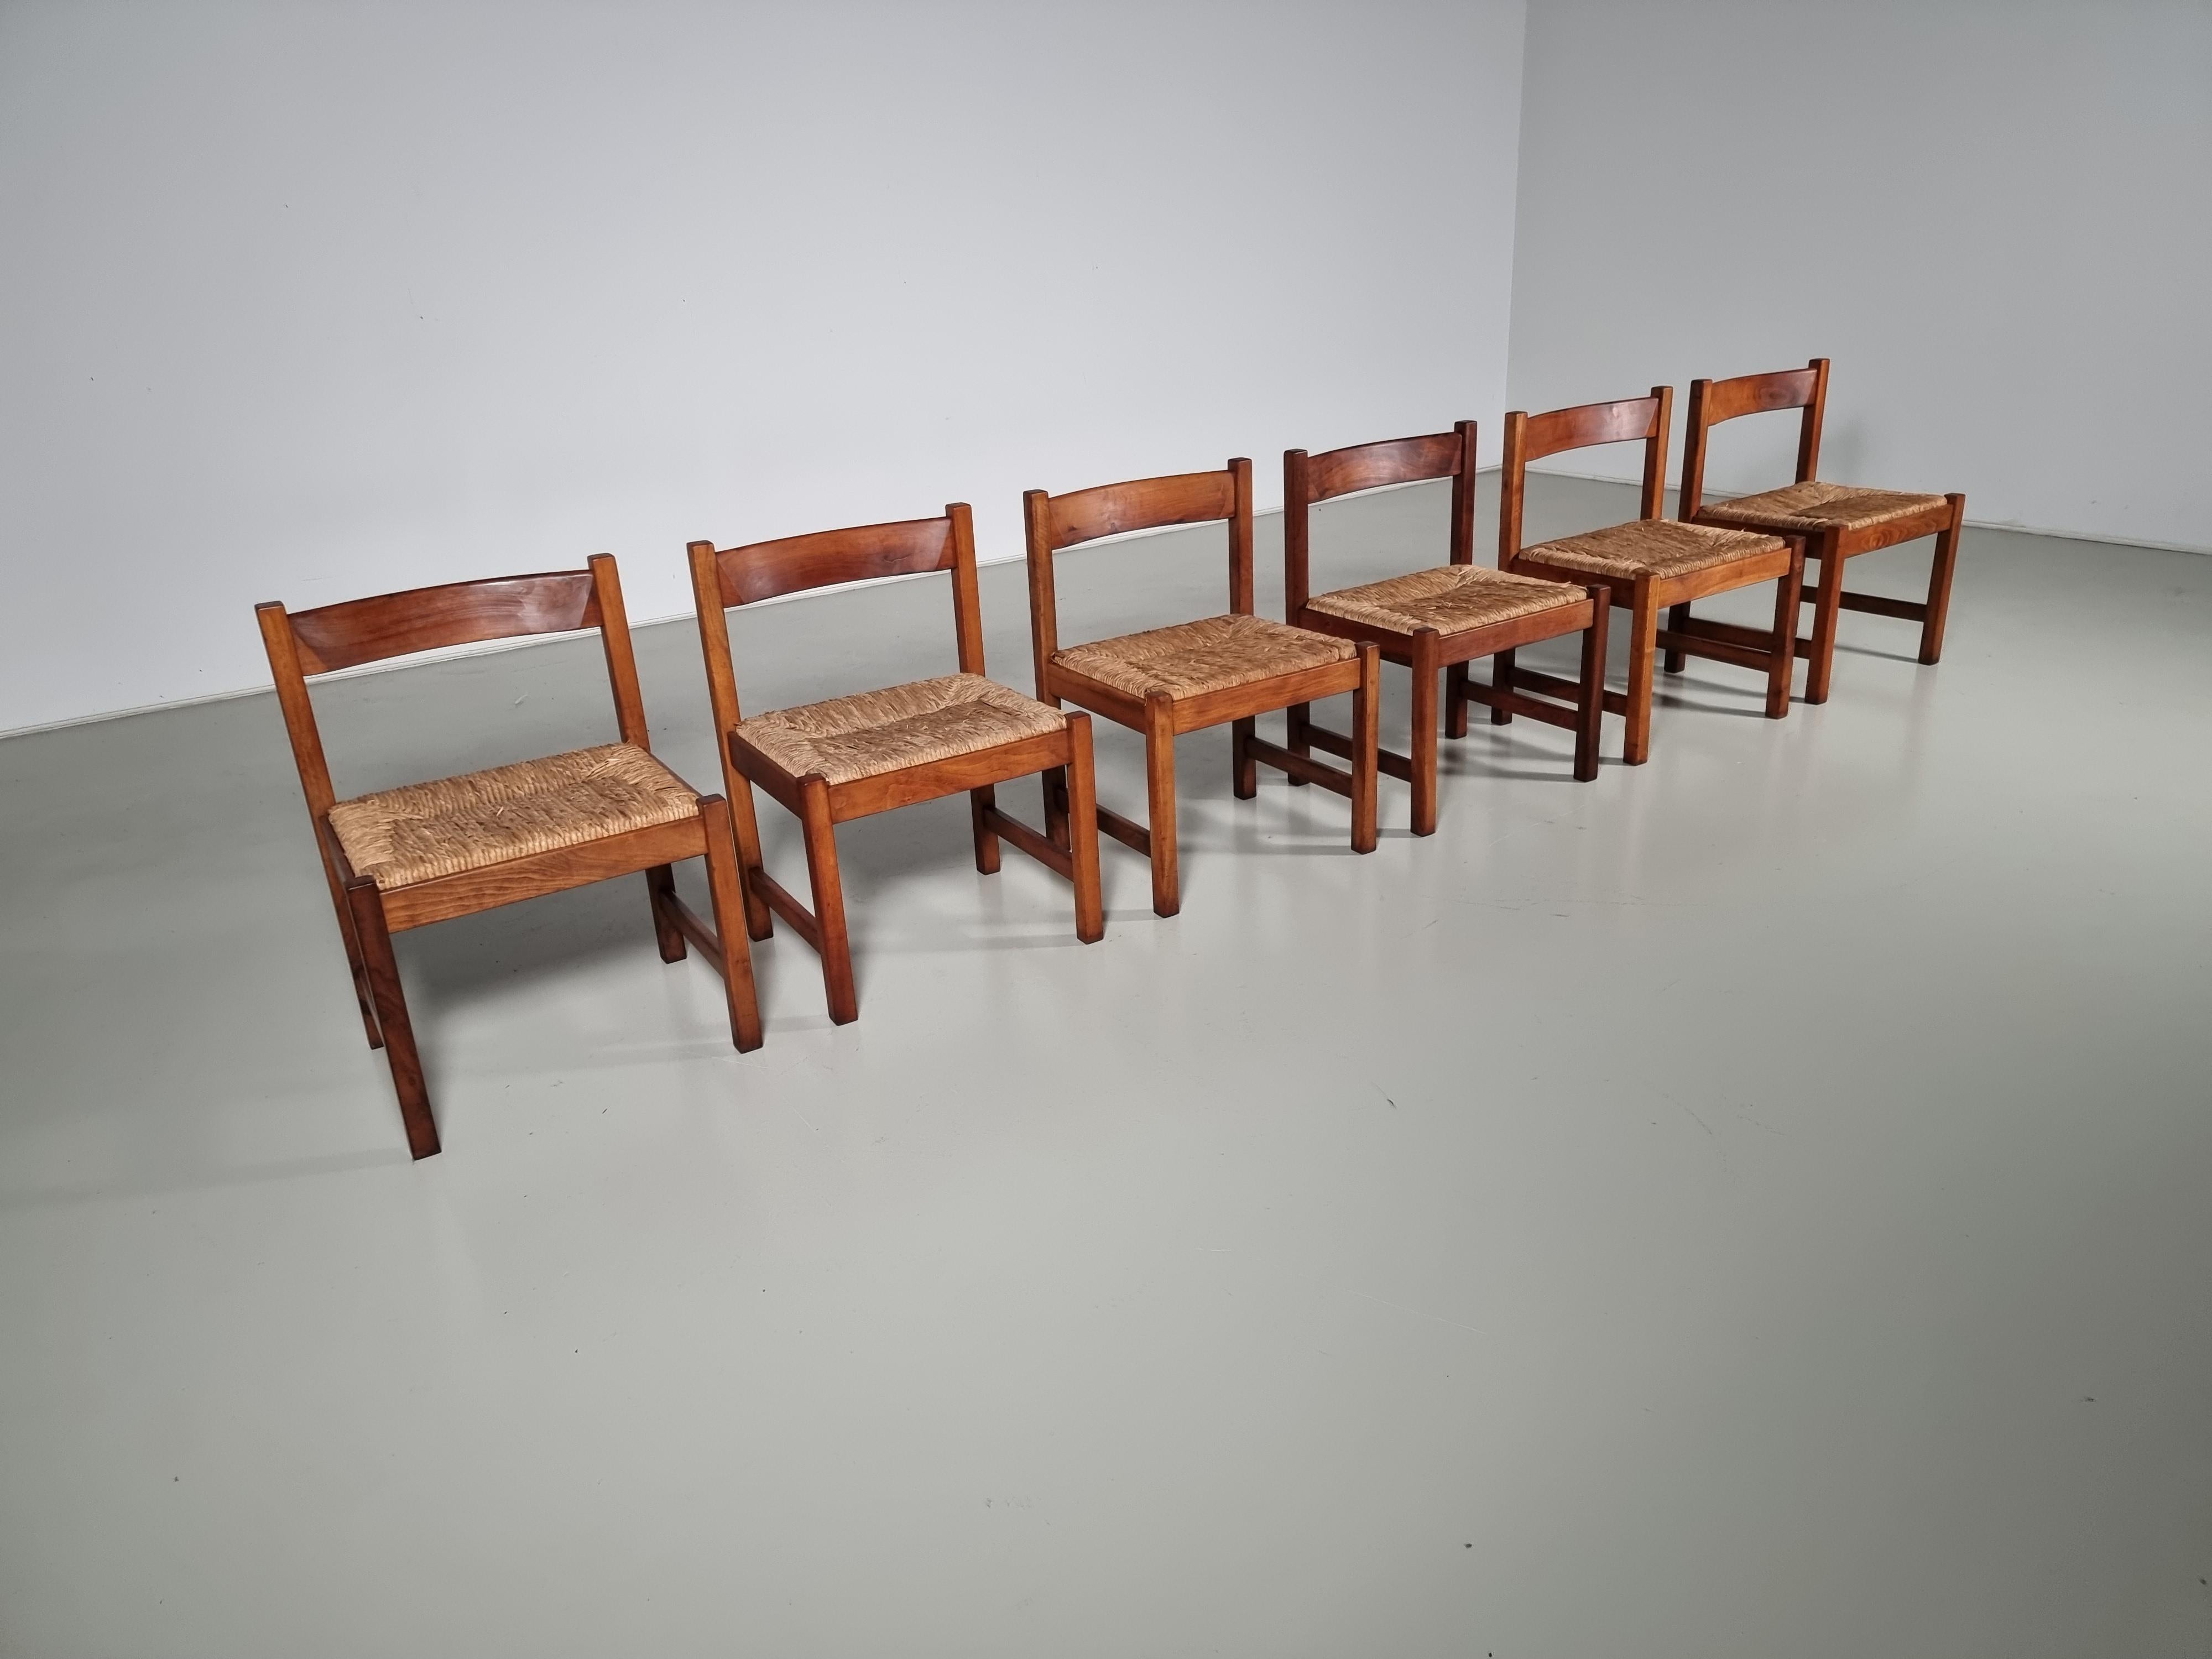 Set of 6 dining chairs from the Torbecchia series, designed by Giovanni Michelucci for Poltronova in 1964.
Solid walnut structure with seats upholstered in rush. The solid wood chairs have gained a stunning patina through the years. The woven rush